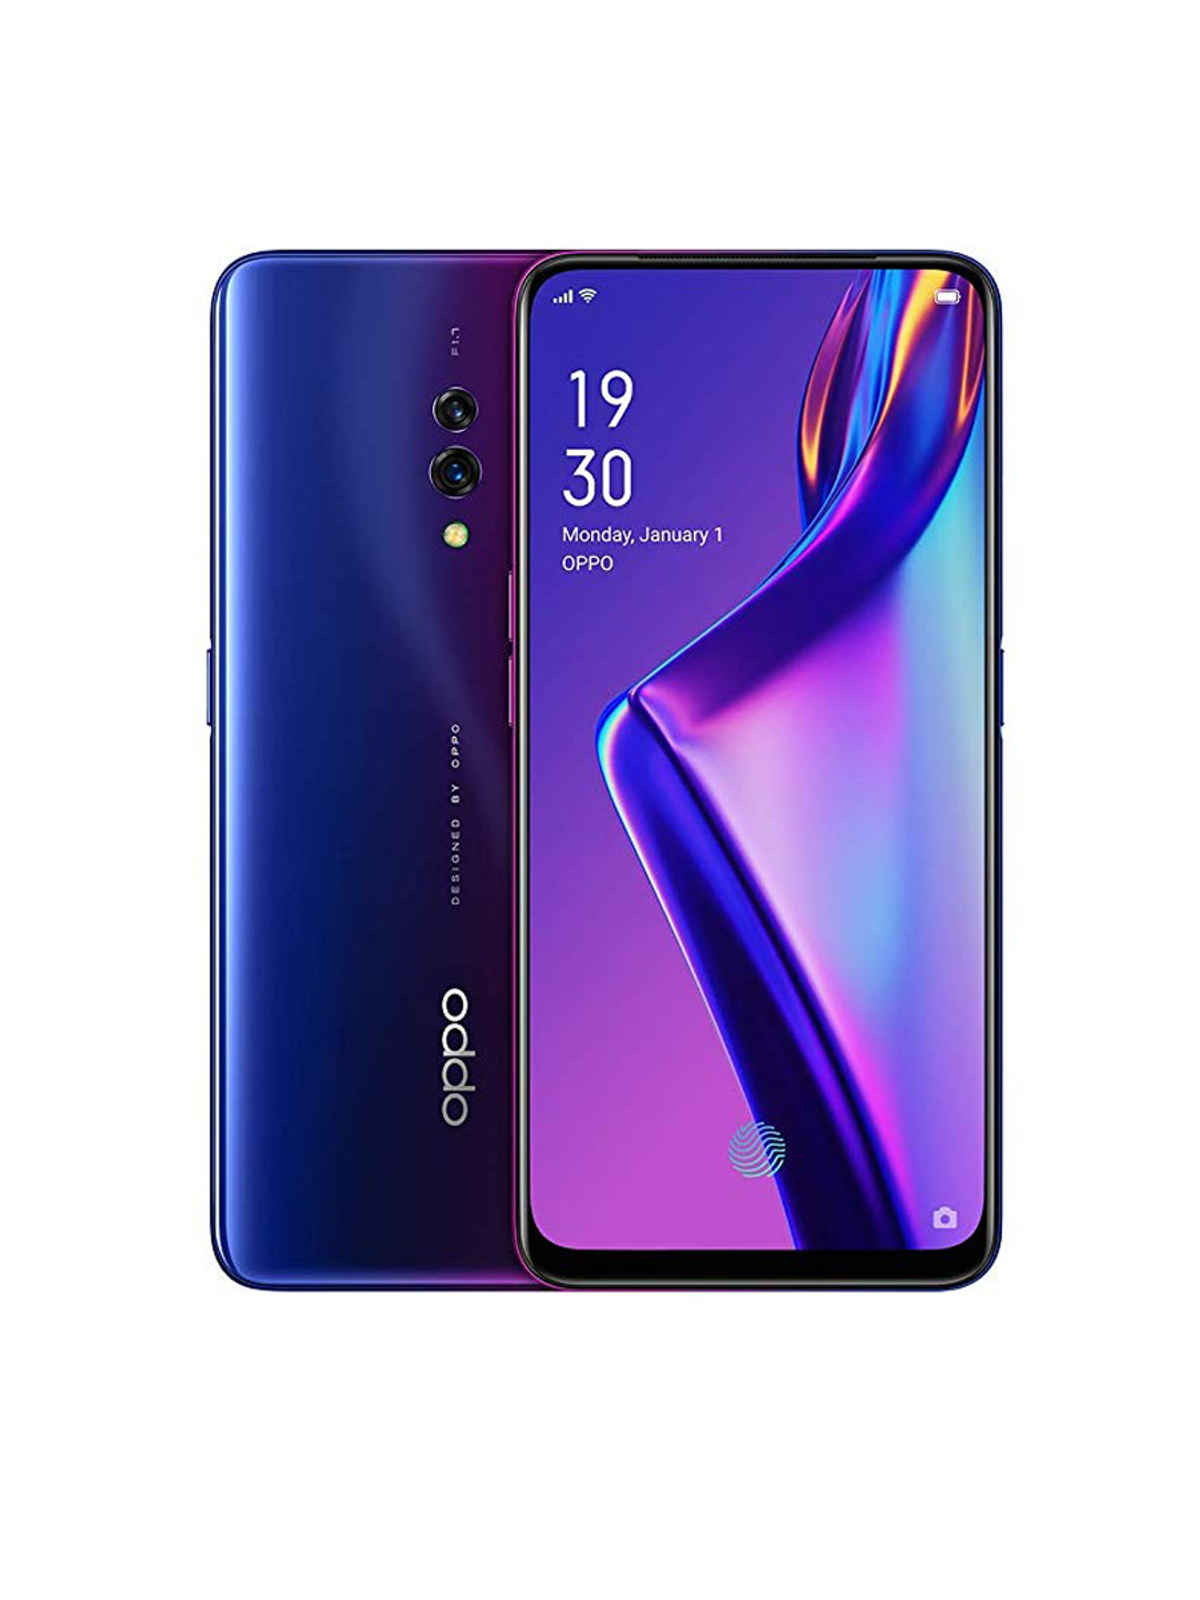 Oppo K3 64GB Price in India, Full Specifications & Features - 17th